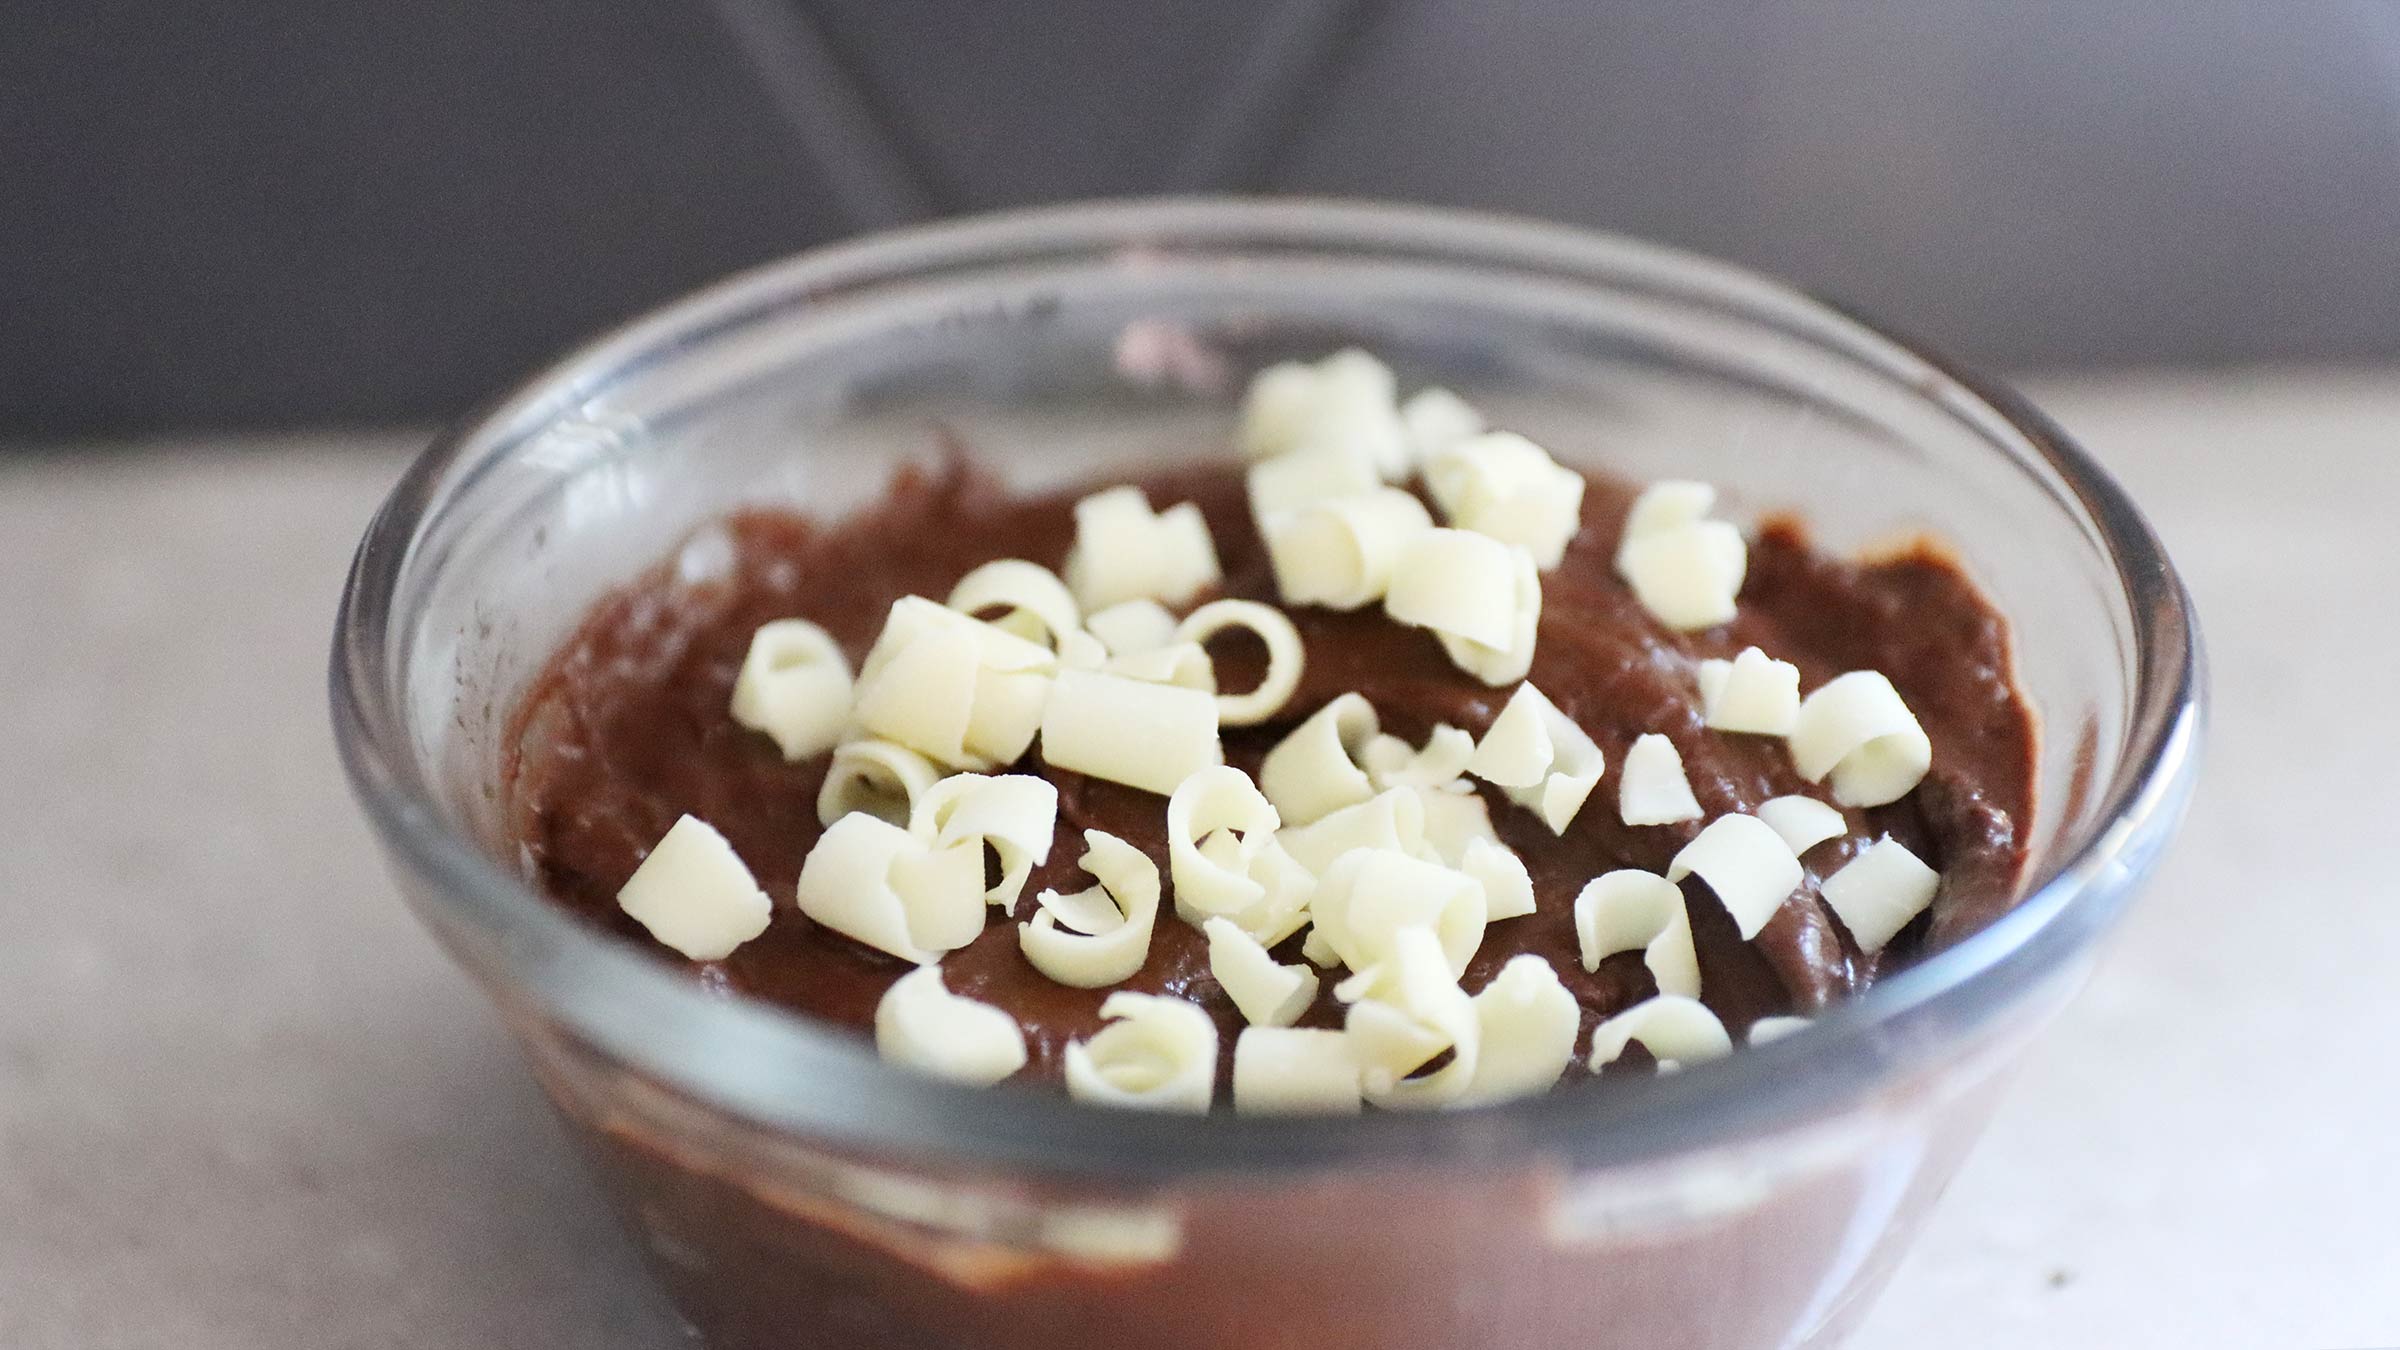 Recipe from our chefs: Secret-ingredient, zero-dairy chocolate pudding